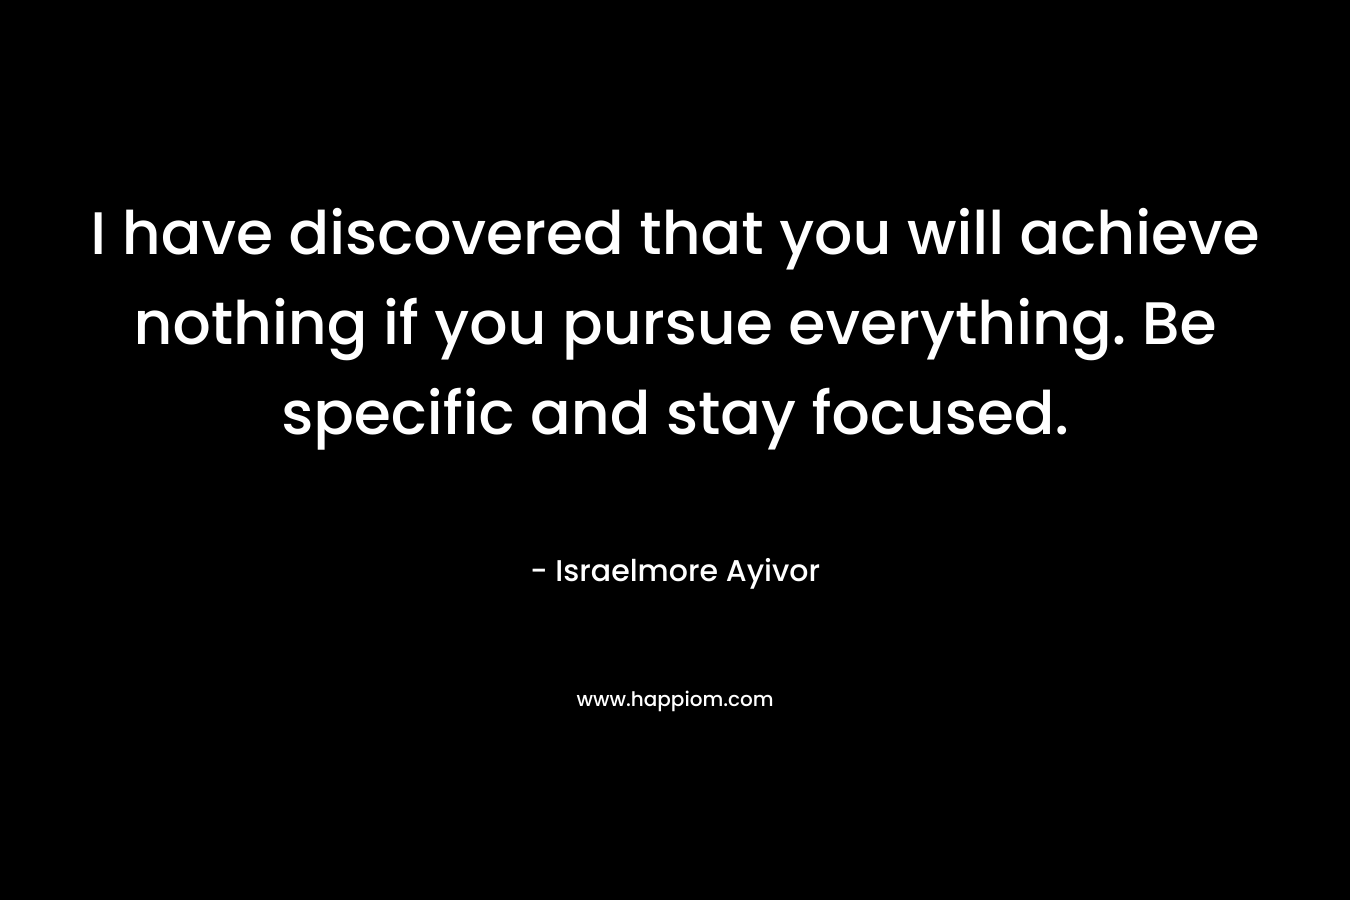 I have discovered that you will achieve nothing if you pursue everything. Be specific and stay focused.